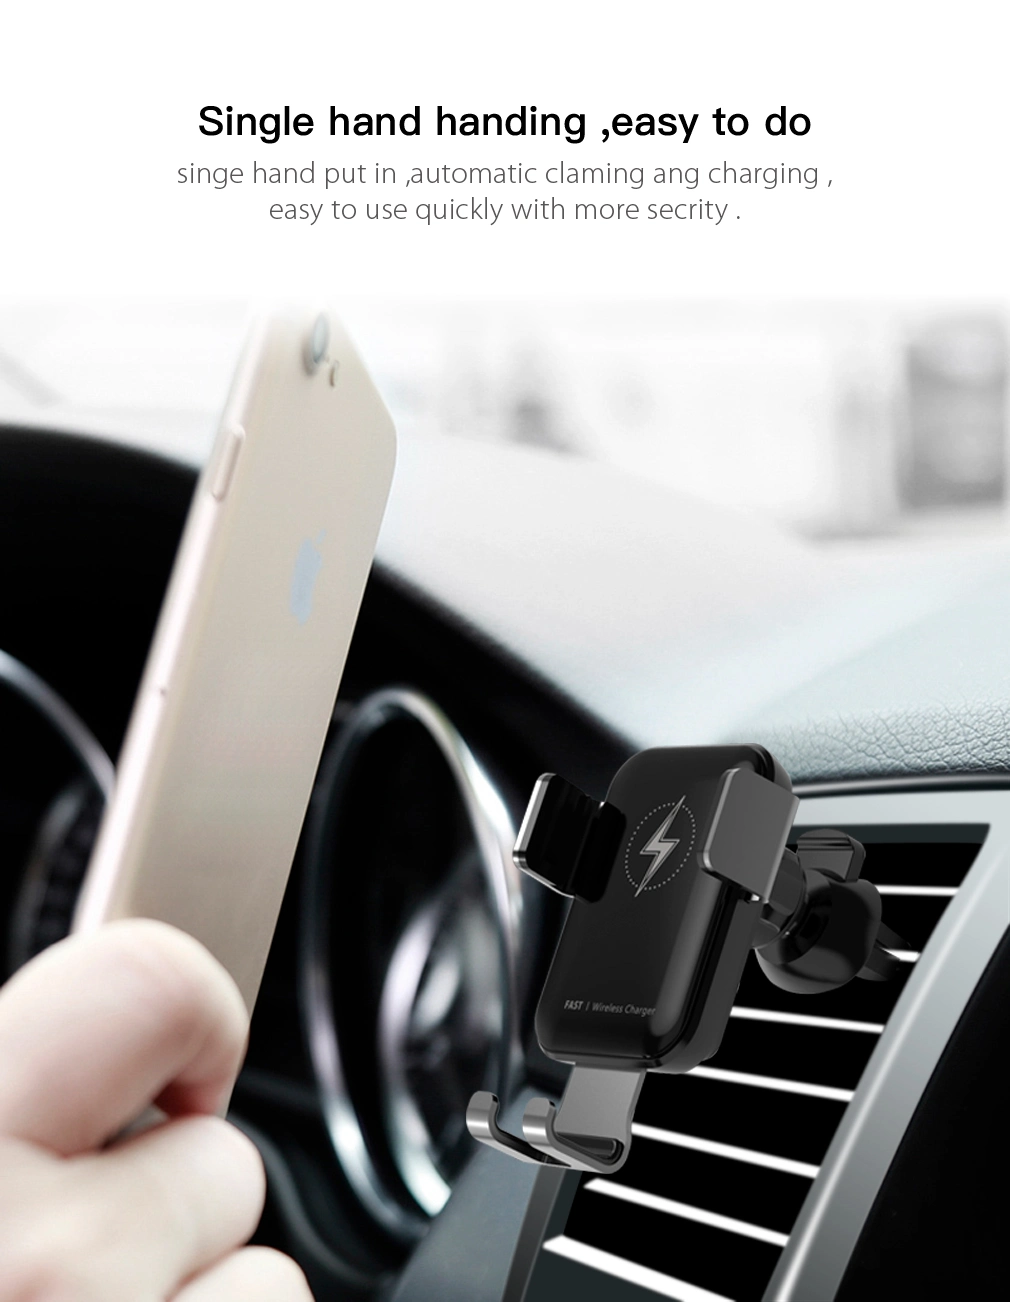 15W Qi Wireless Charger Car Wireless Charger in Car Charger Auto Clamping Best Wireless Car Charger